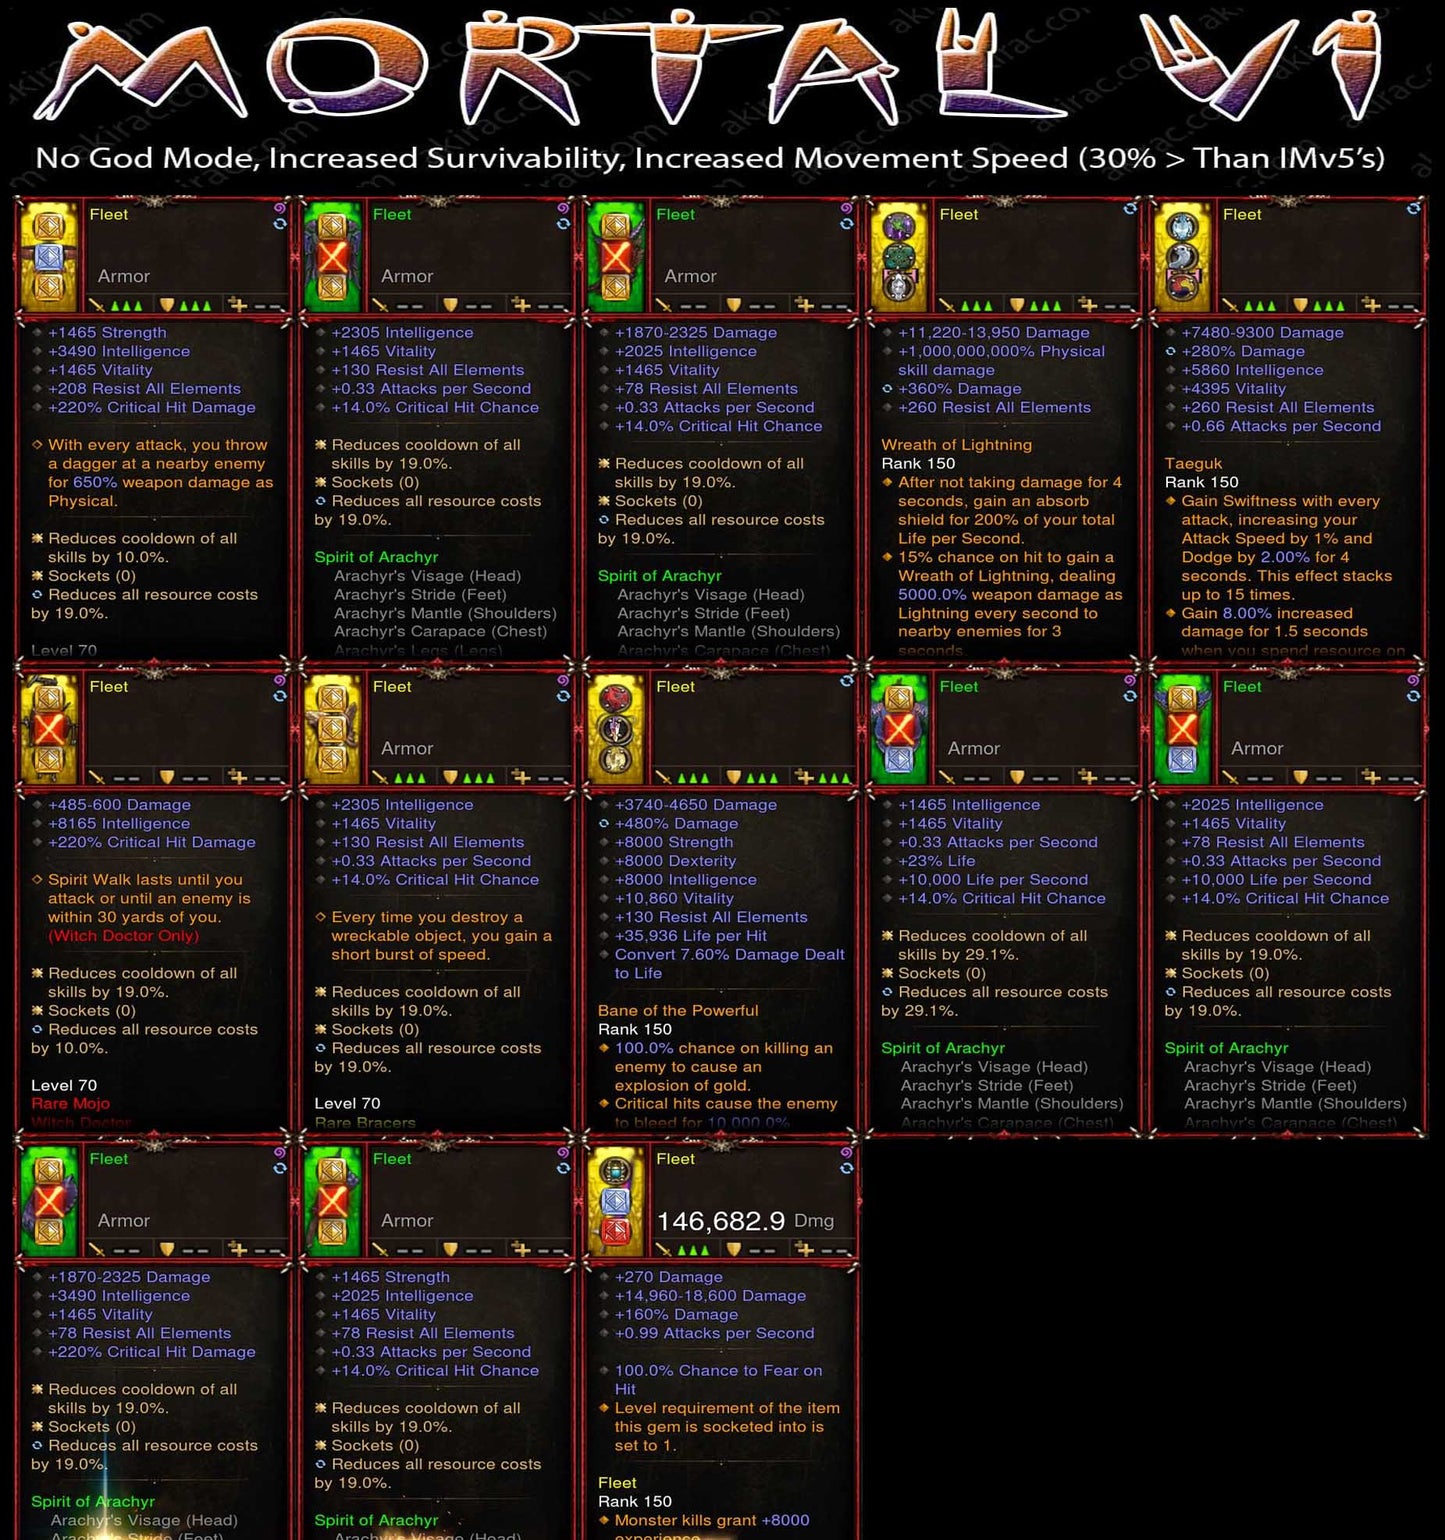 [Primal Ancient] [ Quad DPS] Mortality v1 Fleet Super Movement Speed Anachyr Set Diablo 3 Mods ROS Seasonal and Non Seasonal Save Mod - Modded Items and Gear - Hacks - Cheats - Trainers for Playstation 4 - Playstation 5 - Nintendo Switch - Xbox One